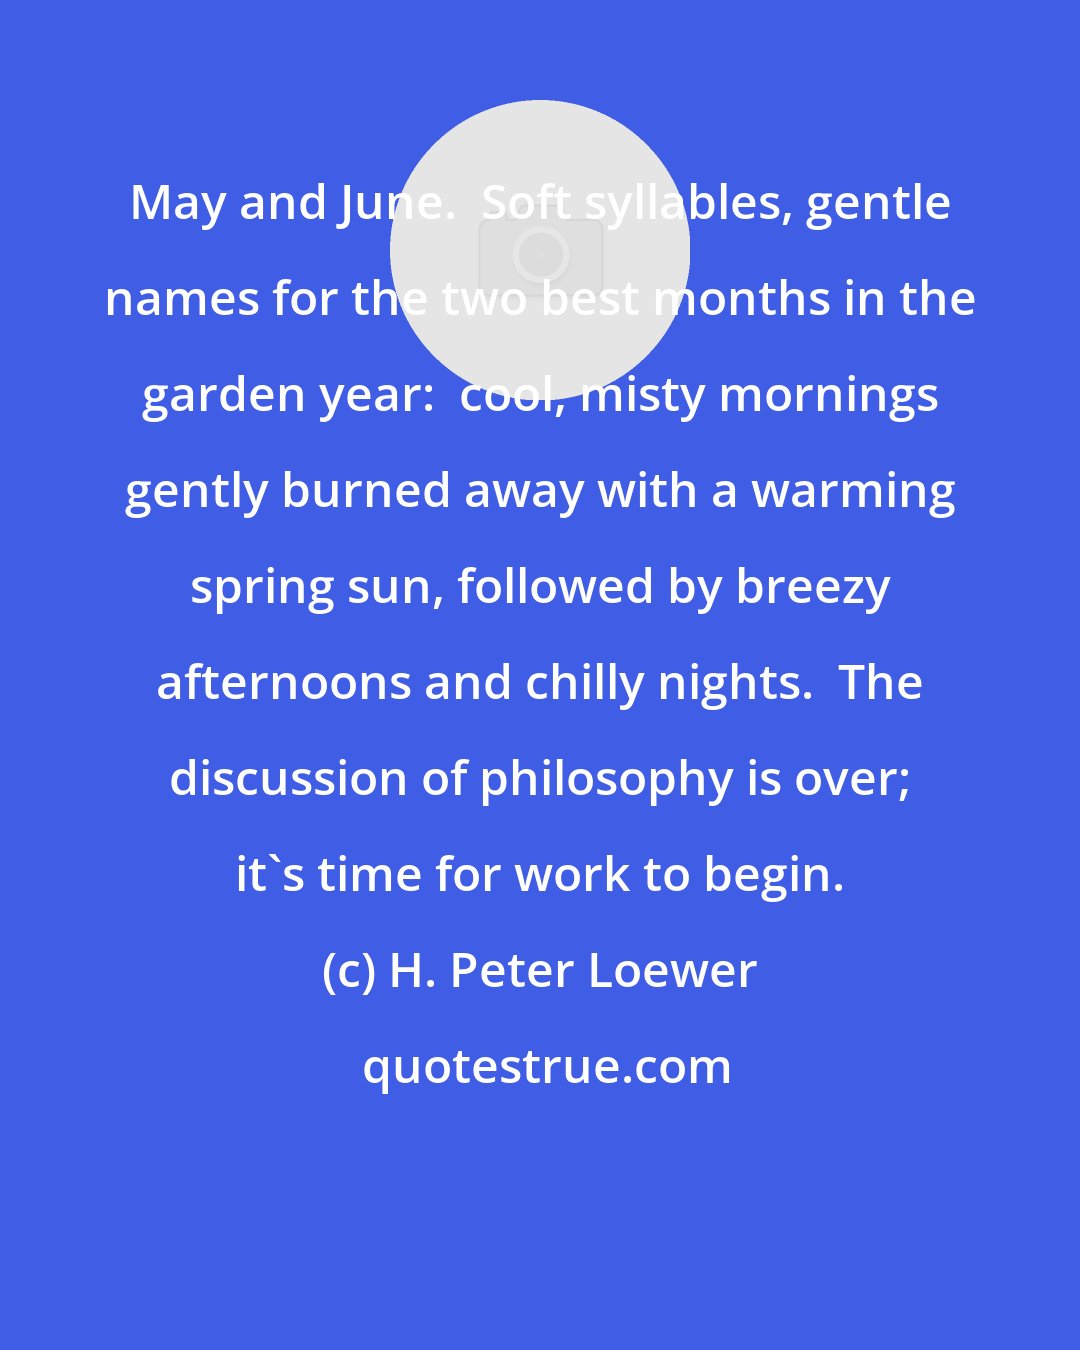 H. Peter Loewer: May and June.  Soft syllables, gentle names for the two best months in the garden year:  cool, misty mornings gently burned away with a warming spring sun, followed by breezy afternoons and chilly nights.  The discussion of philosophy is over; it's time for work to begin.